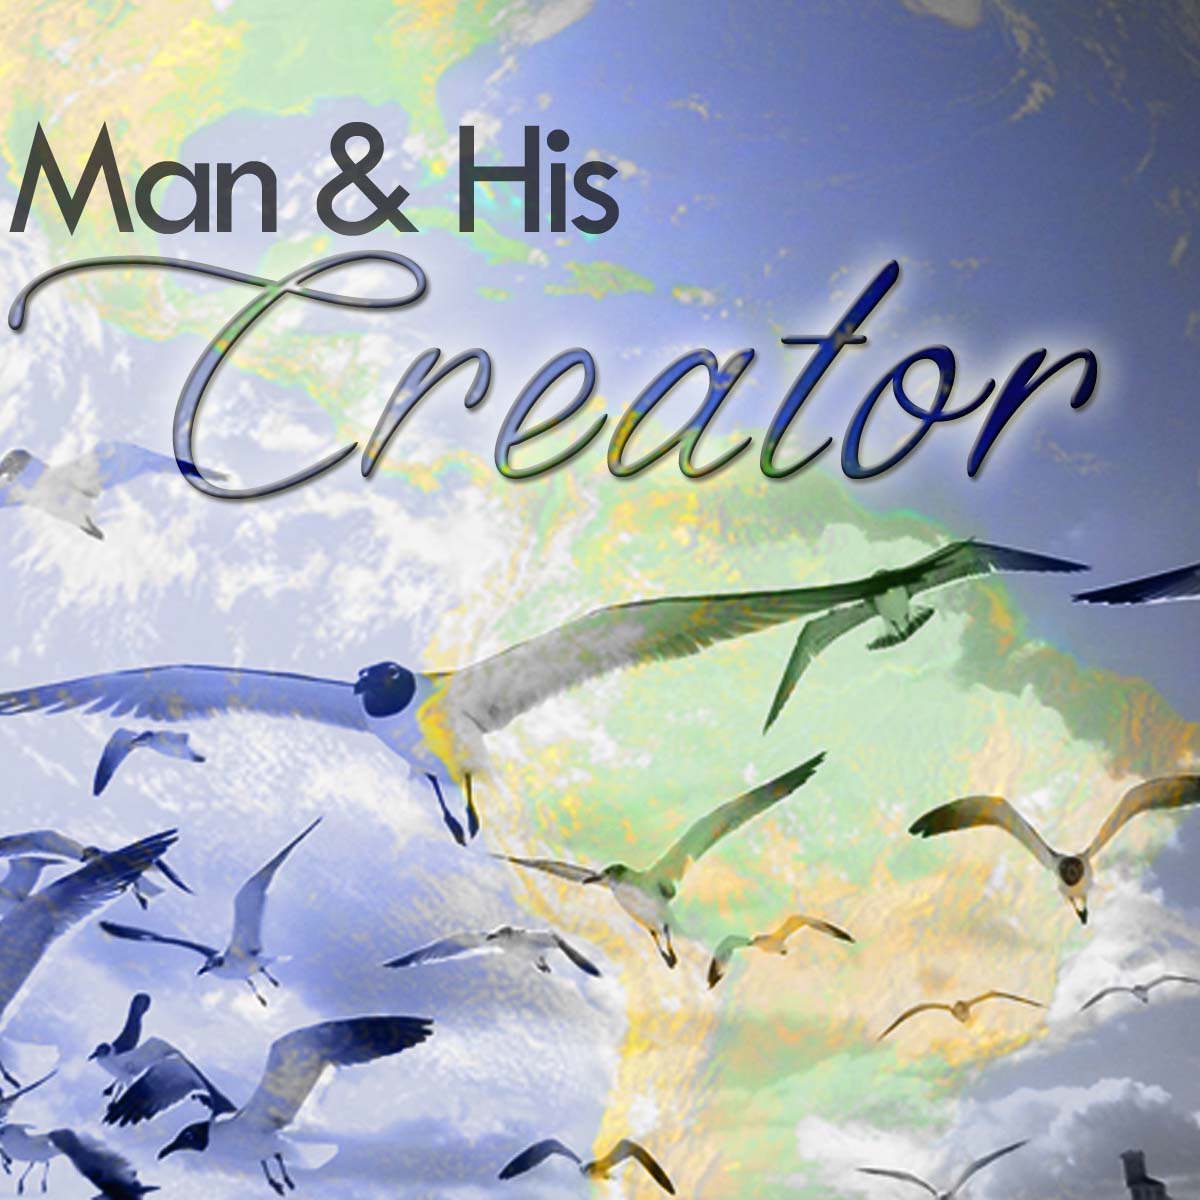 Featured image for “Man & His Creator”